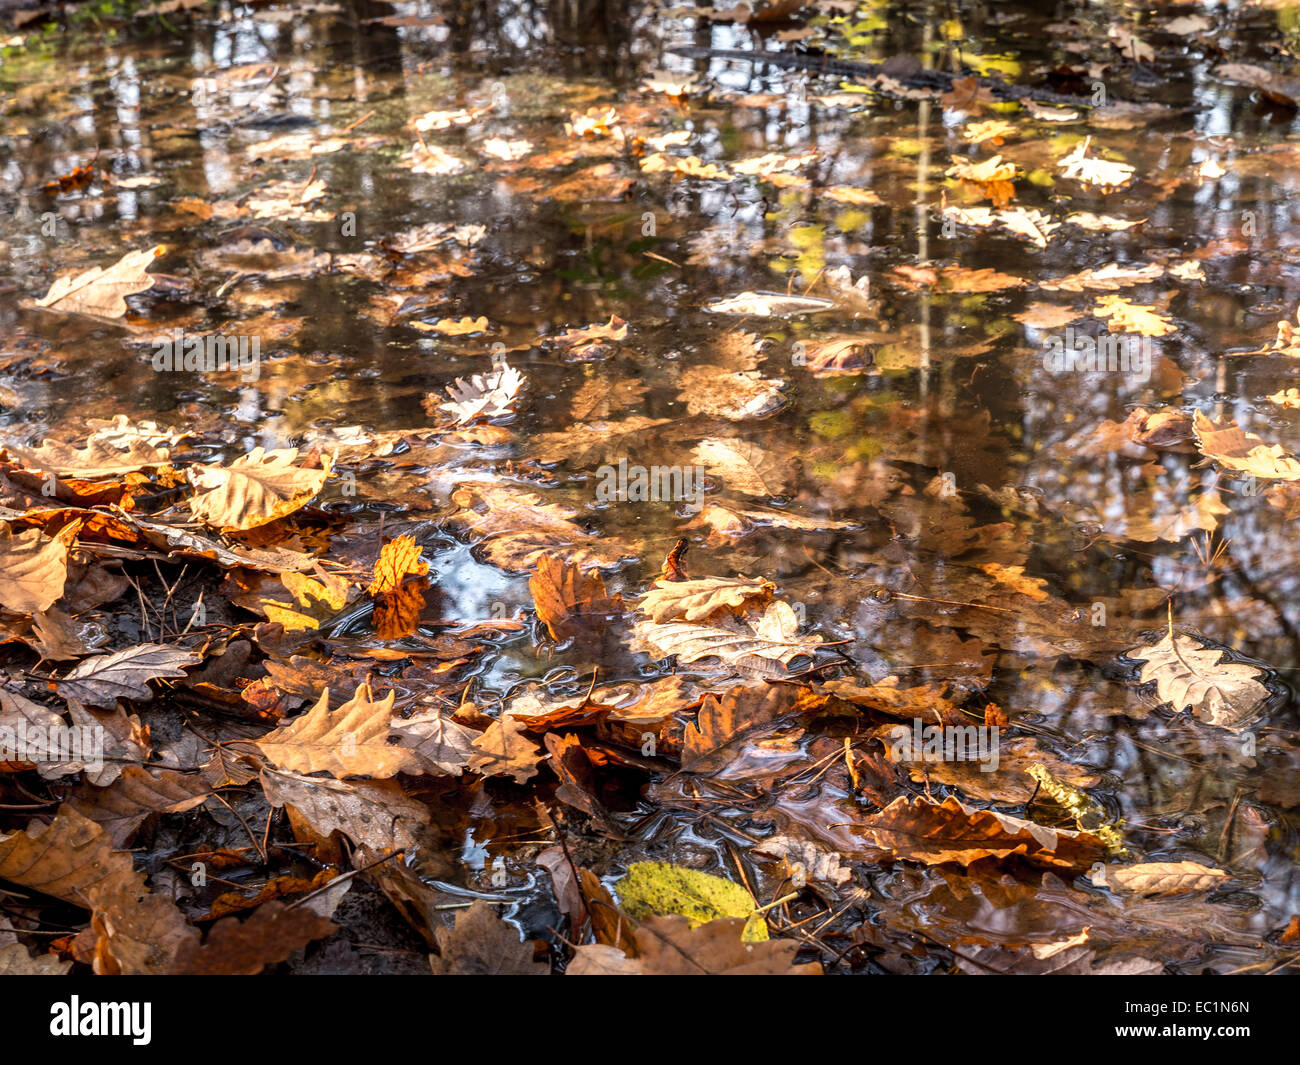 Dead fall leaves floating on water surface Stock Photo